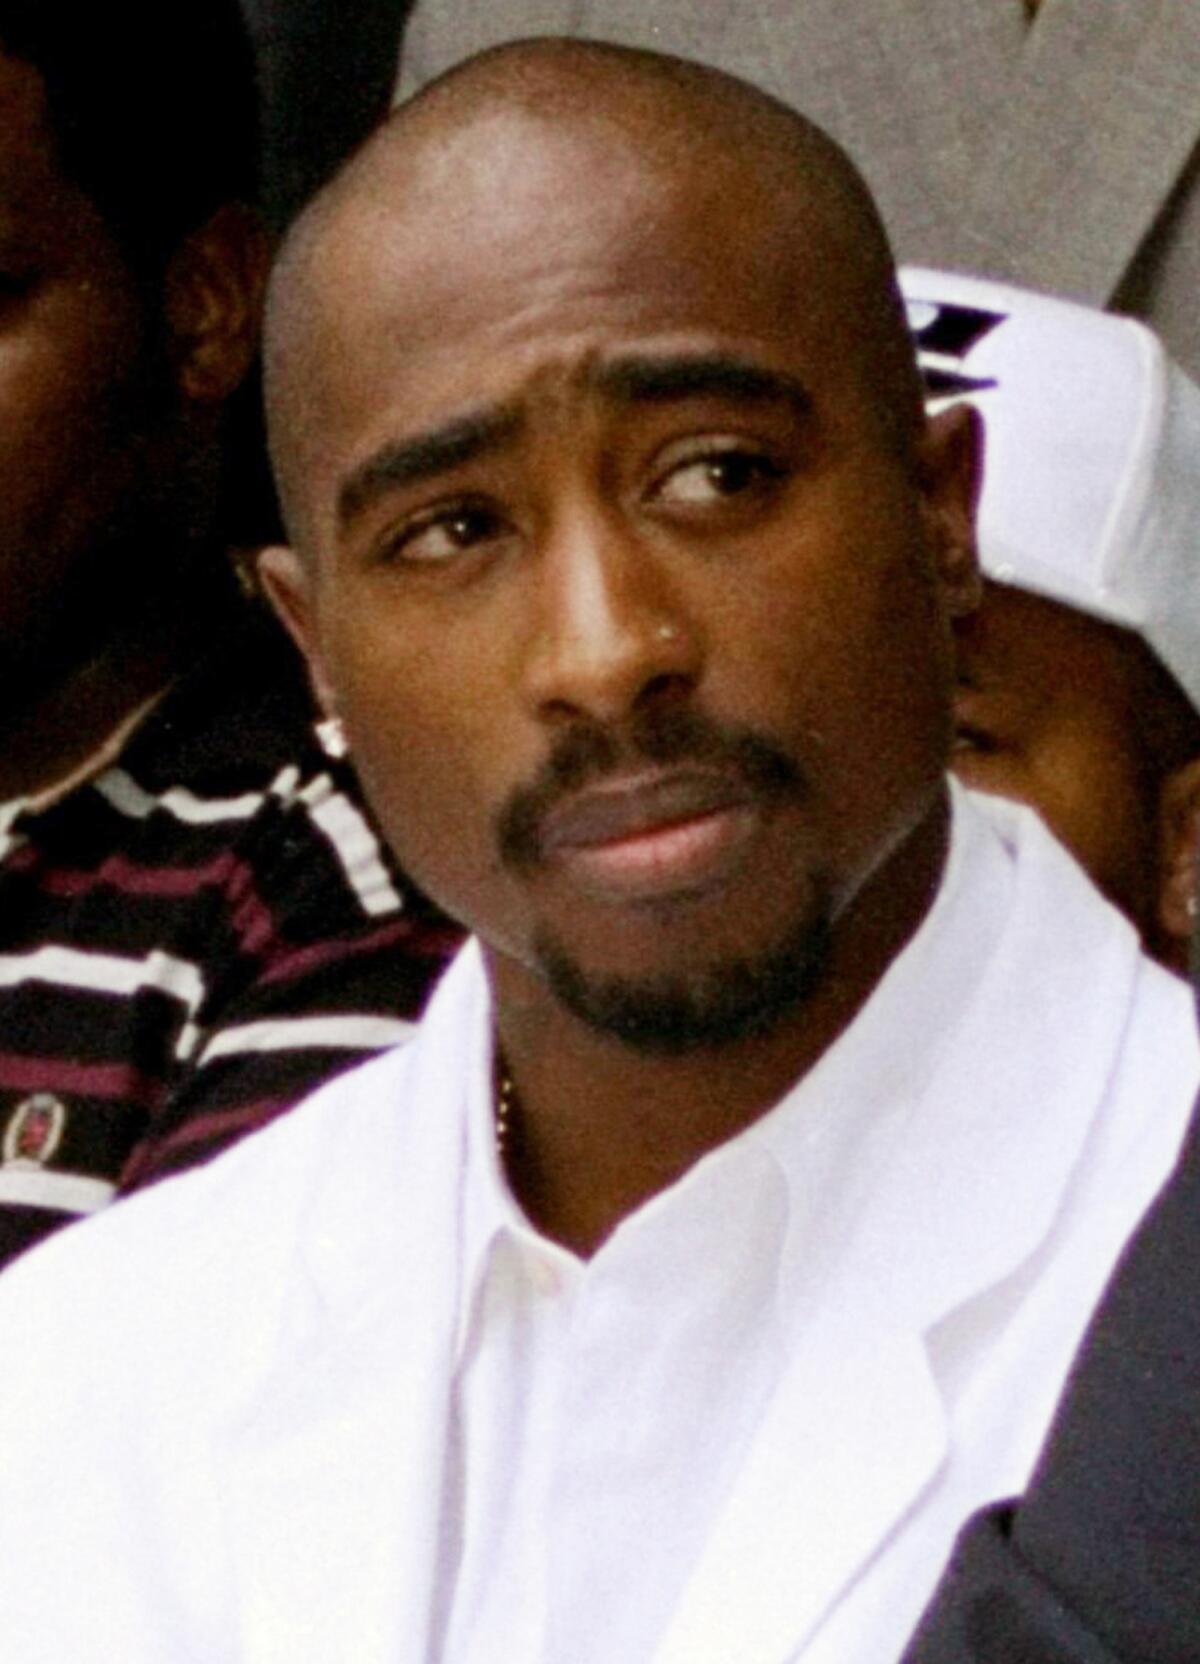 Tupac Shakur wearing a white suit and looking to his left.